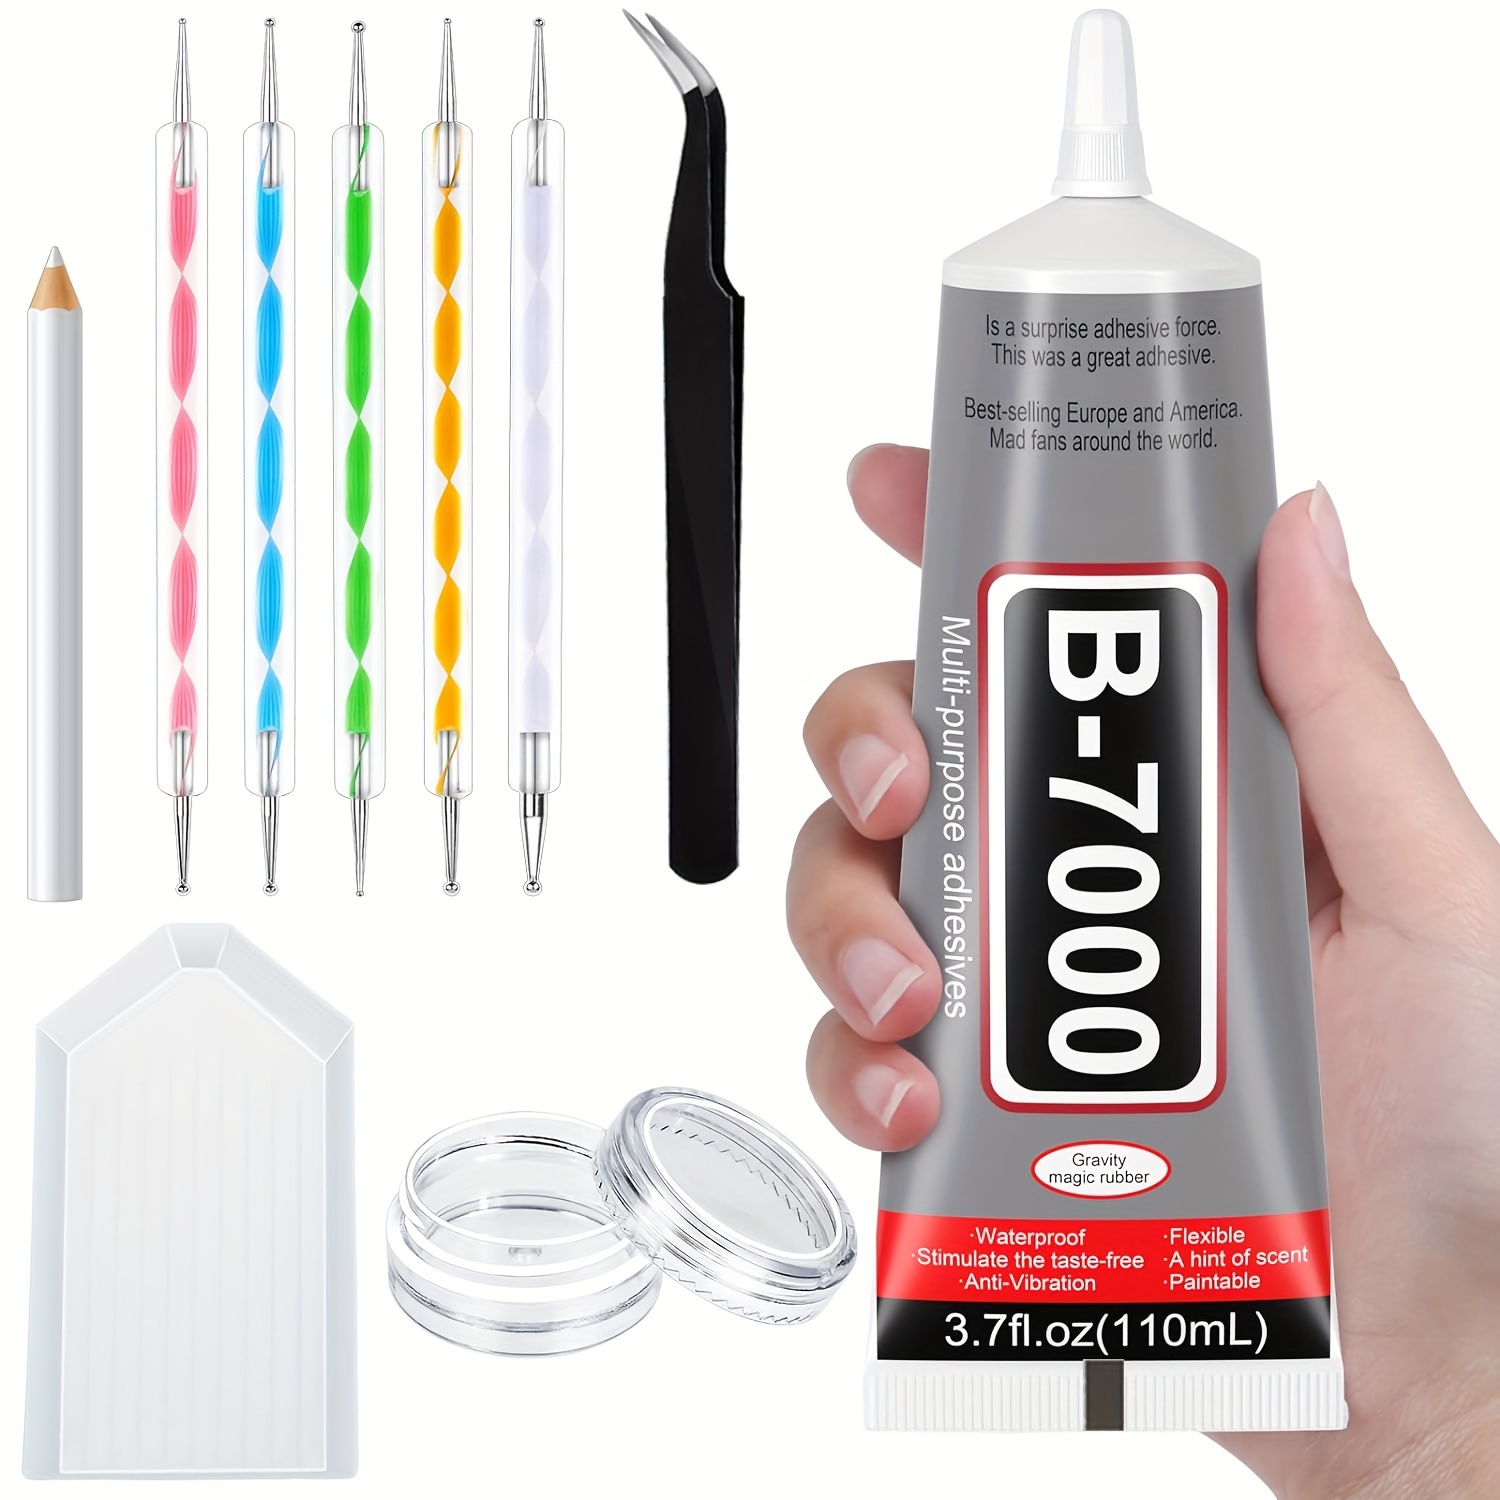 B-7000 Super Adhesive Glue For Jewelry Making - Multi-function